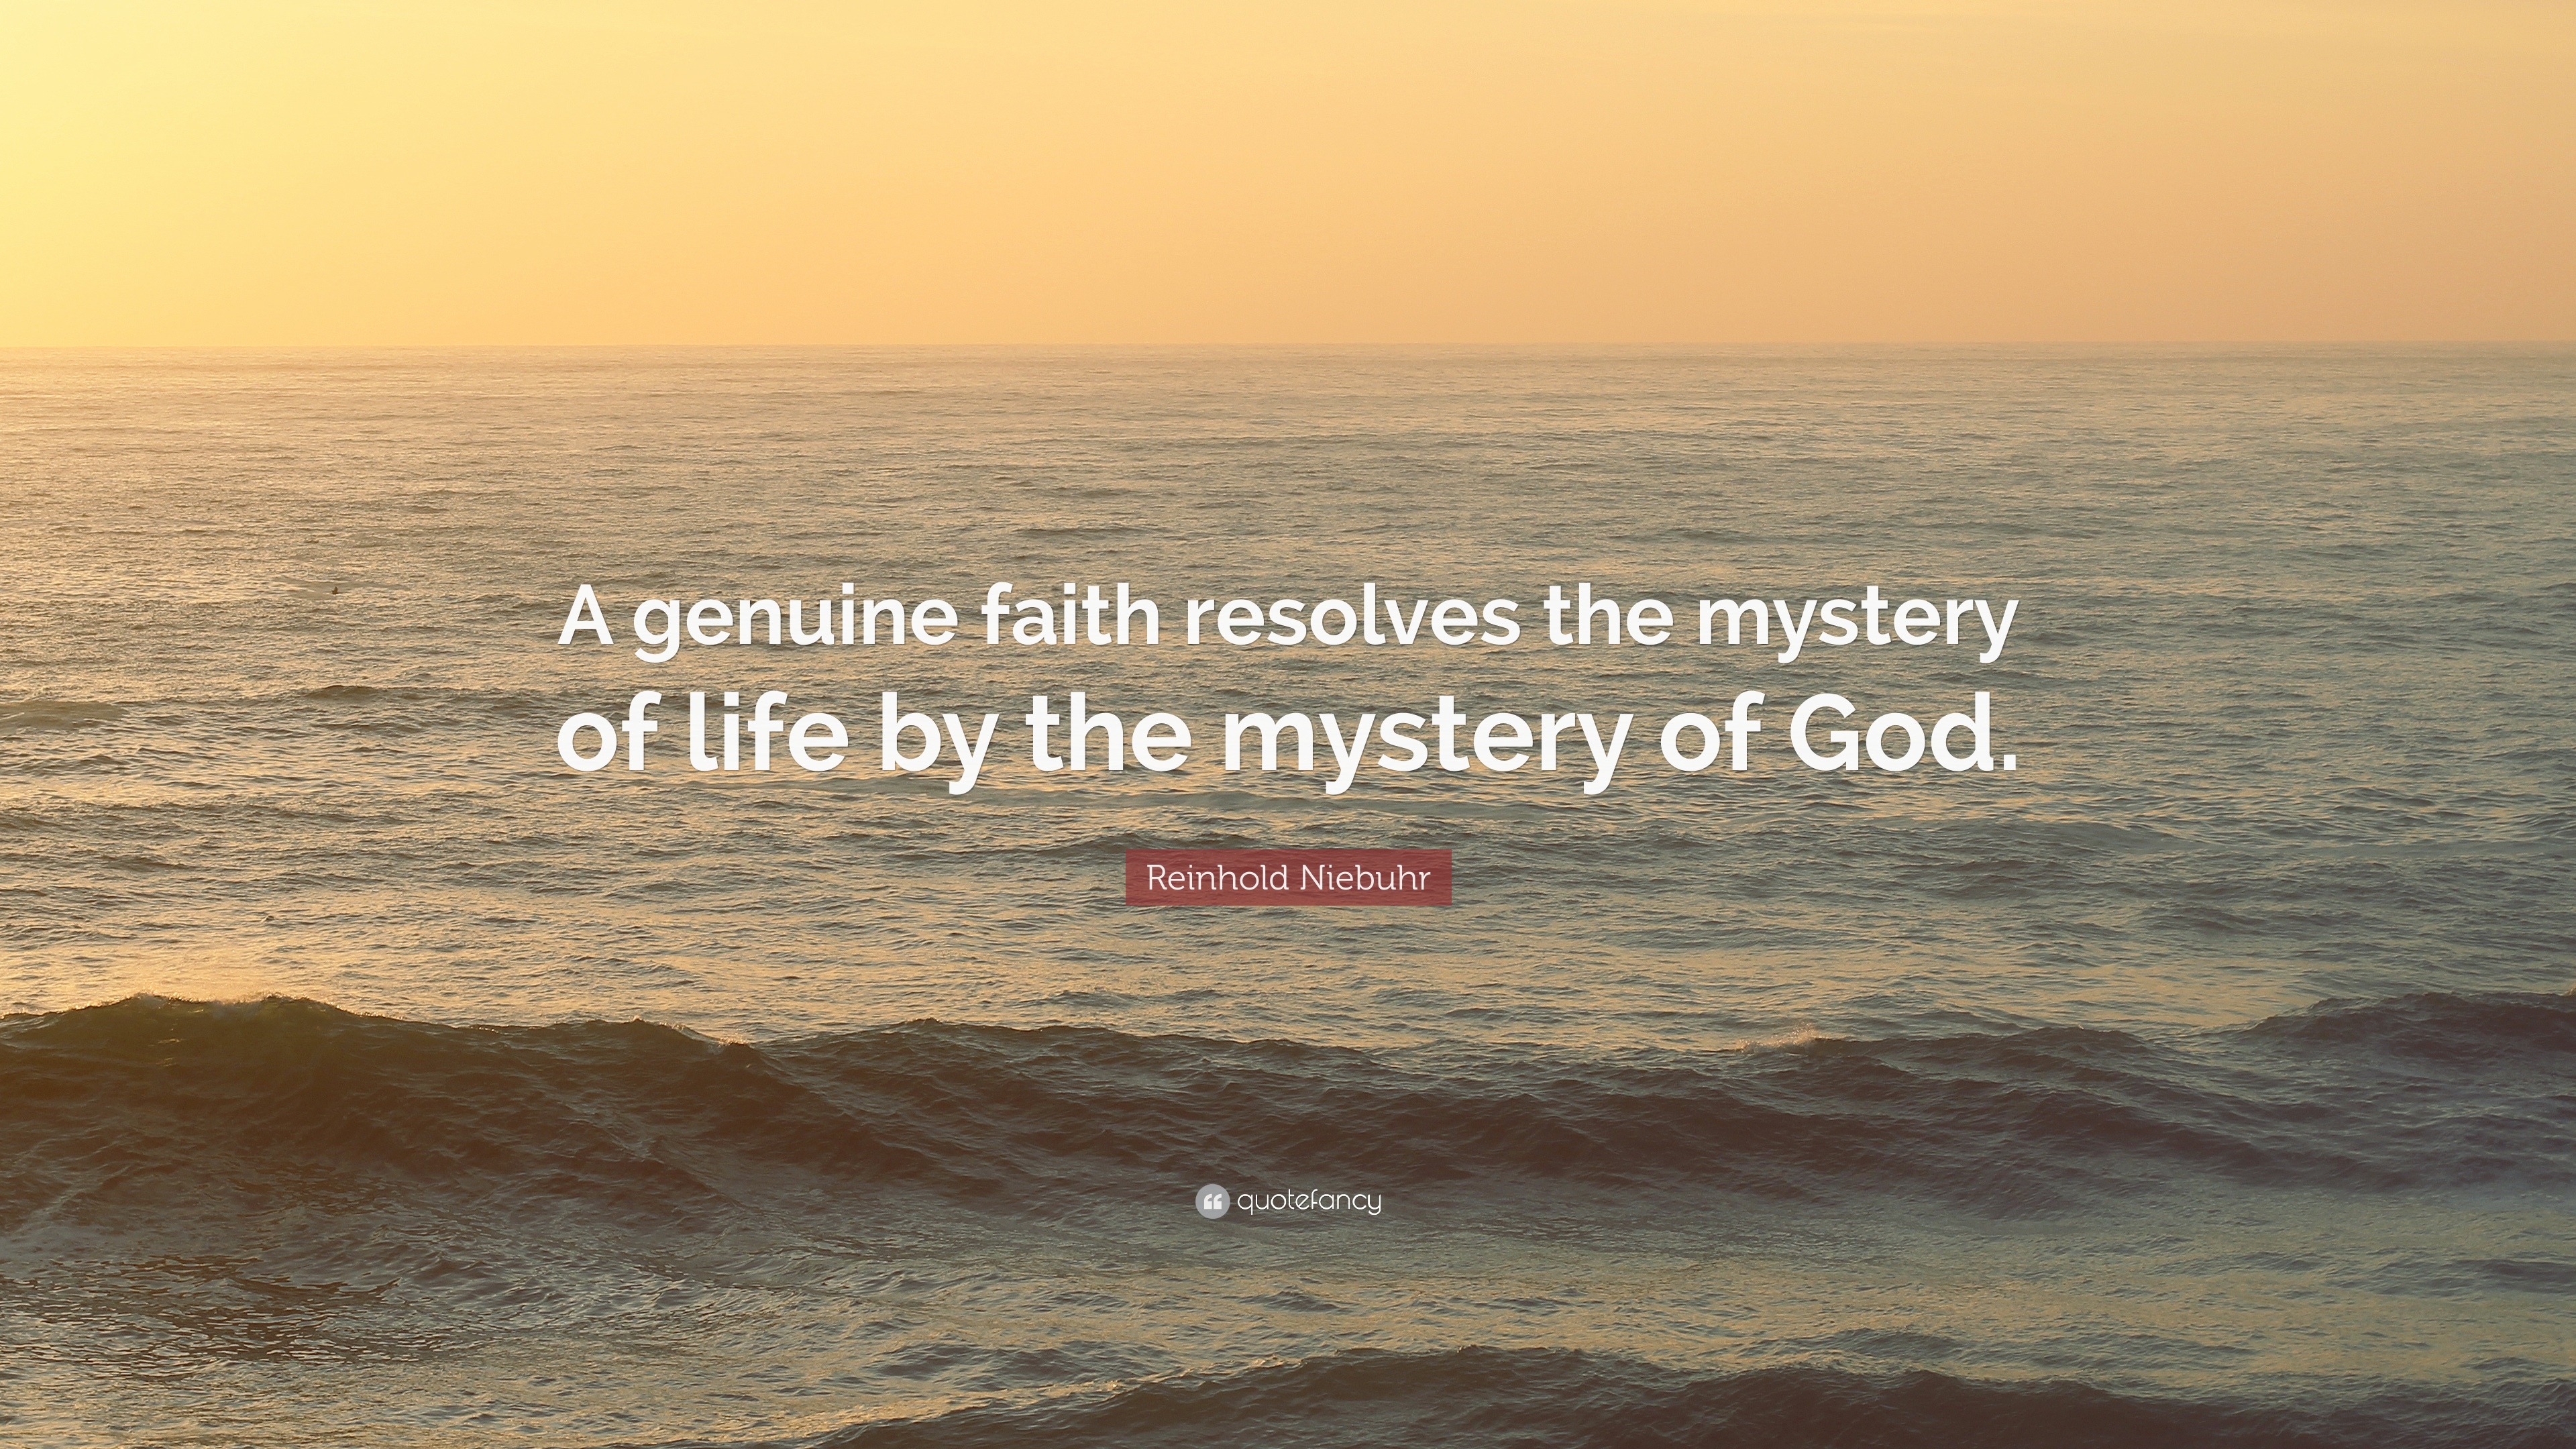 Reinhold Niebuhr Quote “A genuine faith resolves the mystery of life